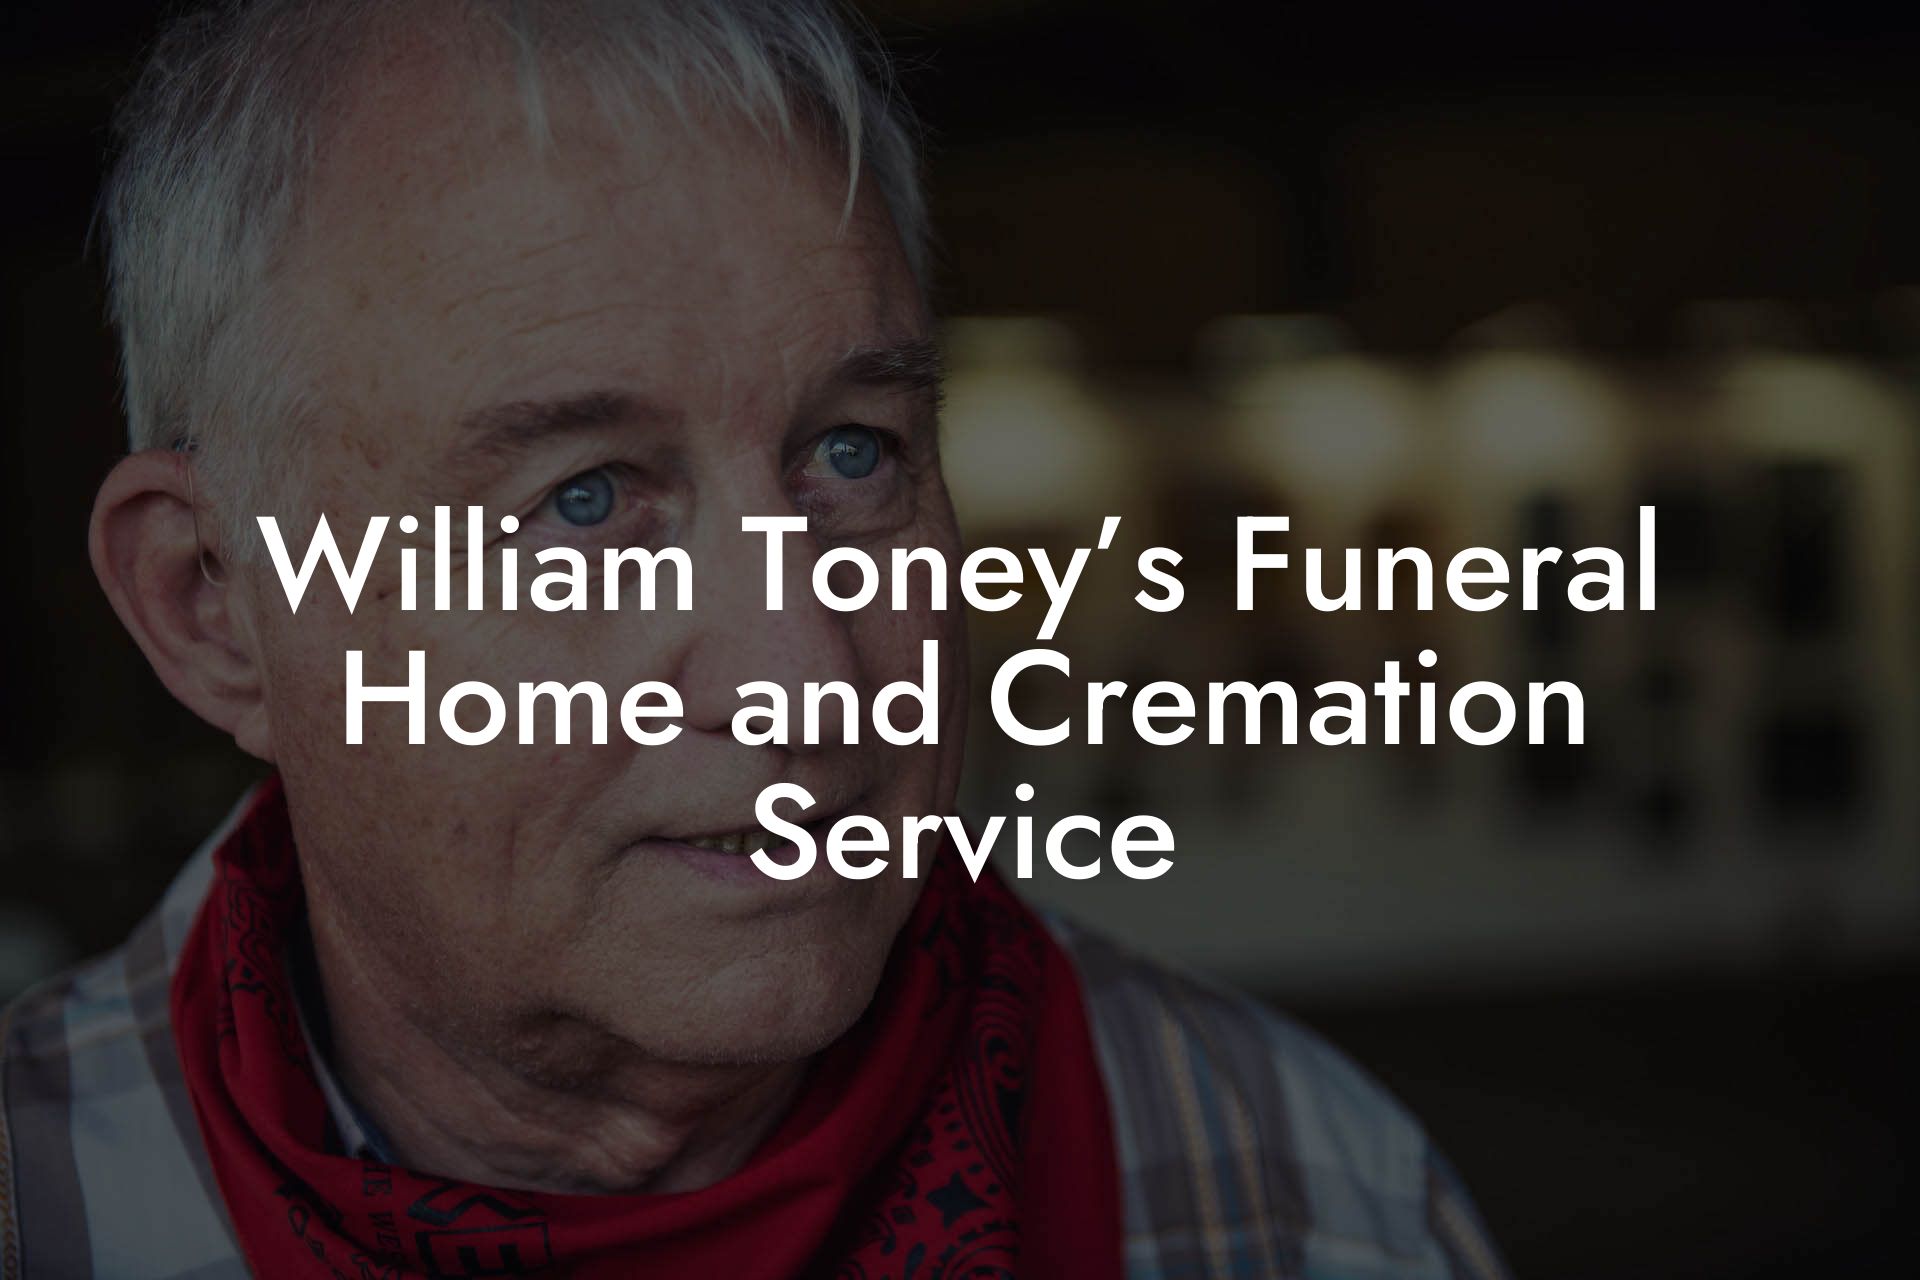 William Toney’s Funeral Home and Cremation Service - Eulogy Assistant